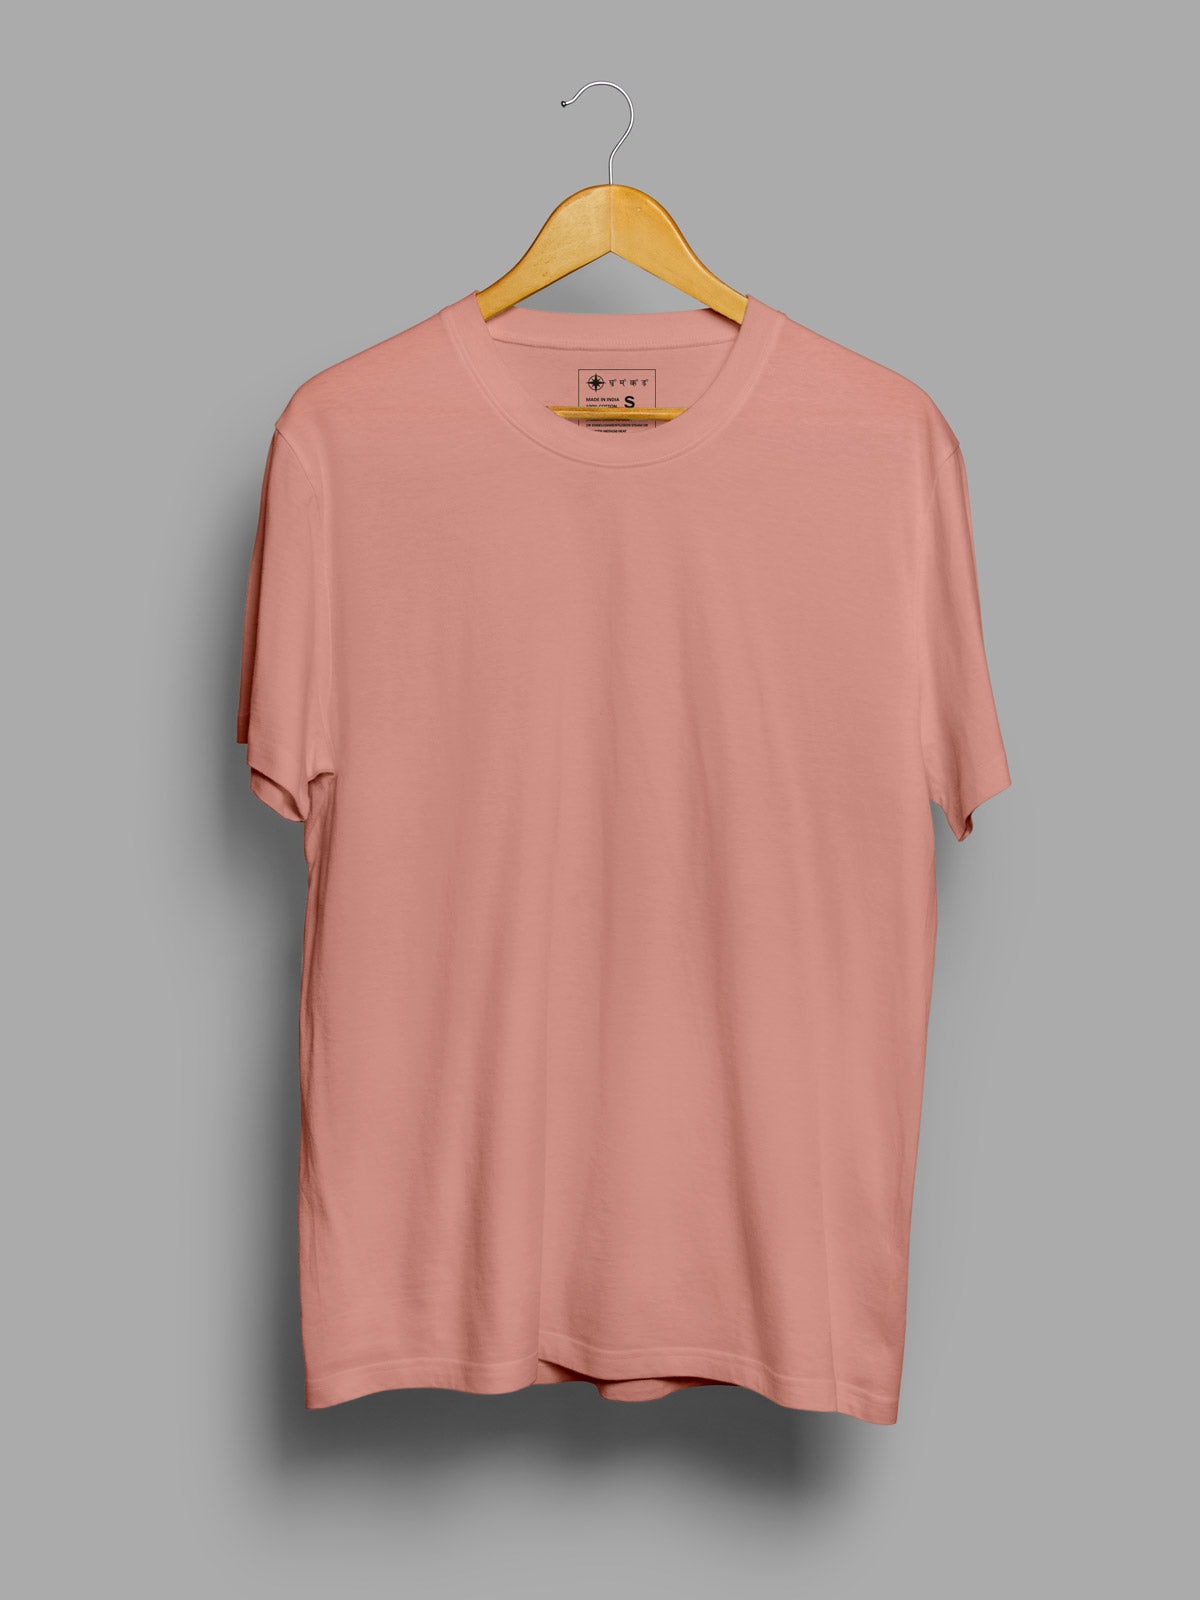 Pack of 2 | Red & Sunset Pink Unisex Plain T shirt